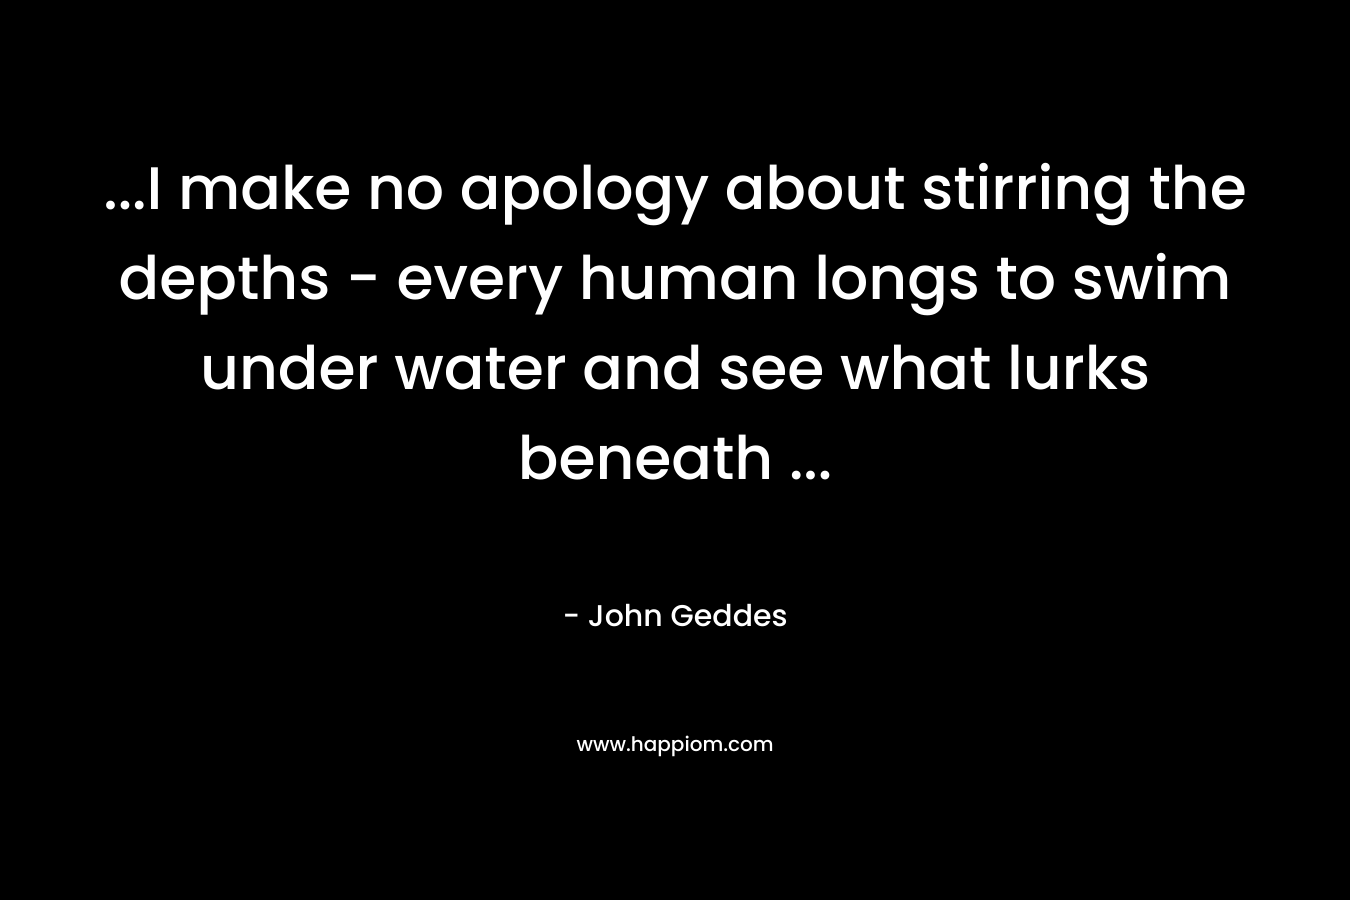 ...I make no apology about stirring the depths - every human longs to swim under water and see what lurks beneath ...